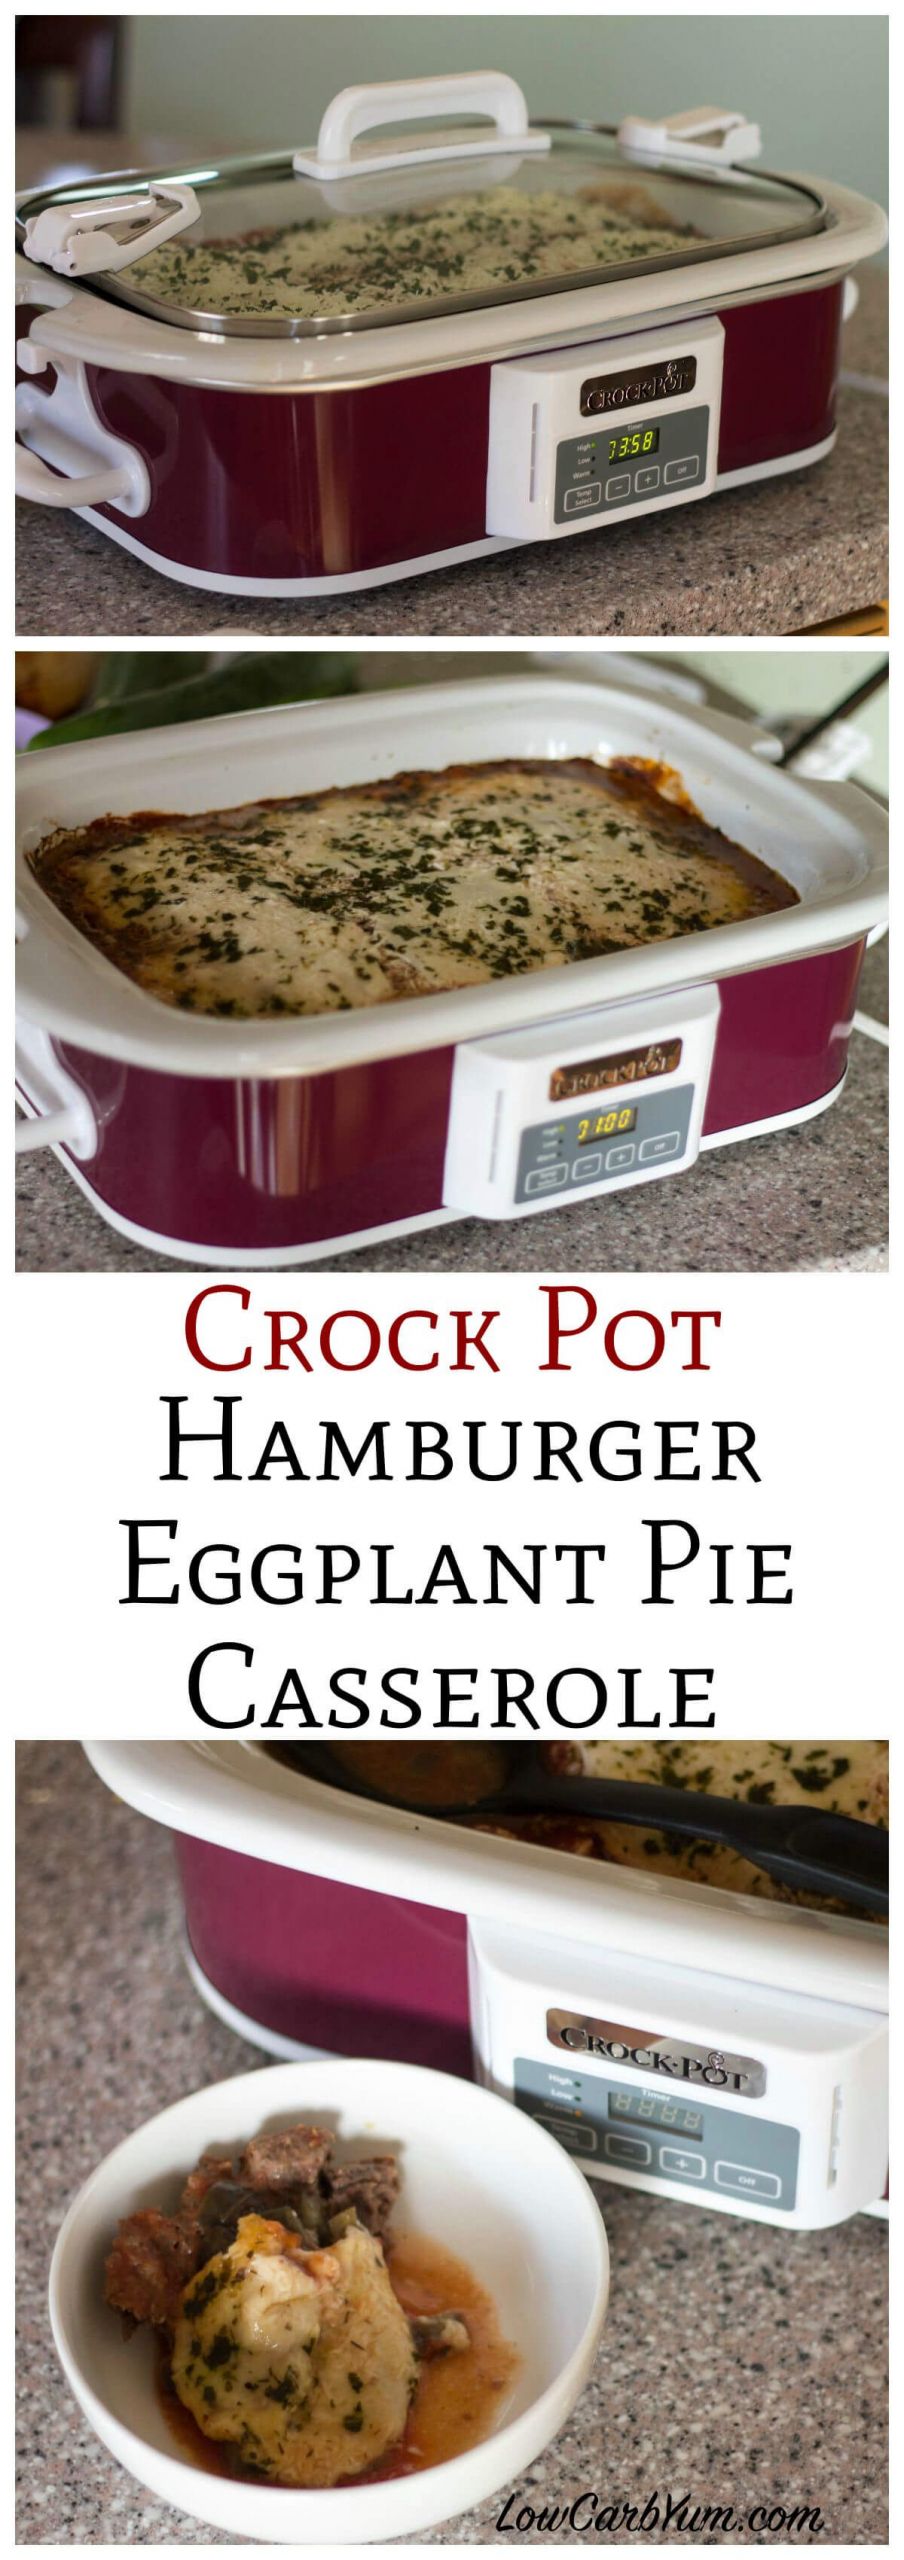 Low Carb Crock Pot Recipes Ground Beef
 A low carb ground beef eggplant casserole that bakes in a